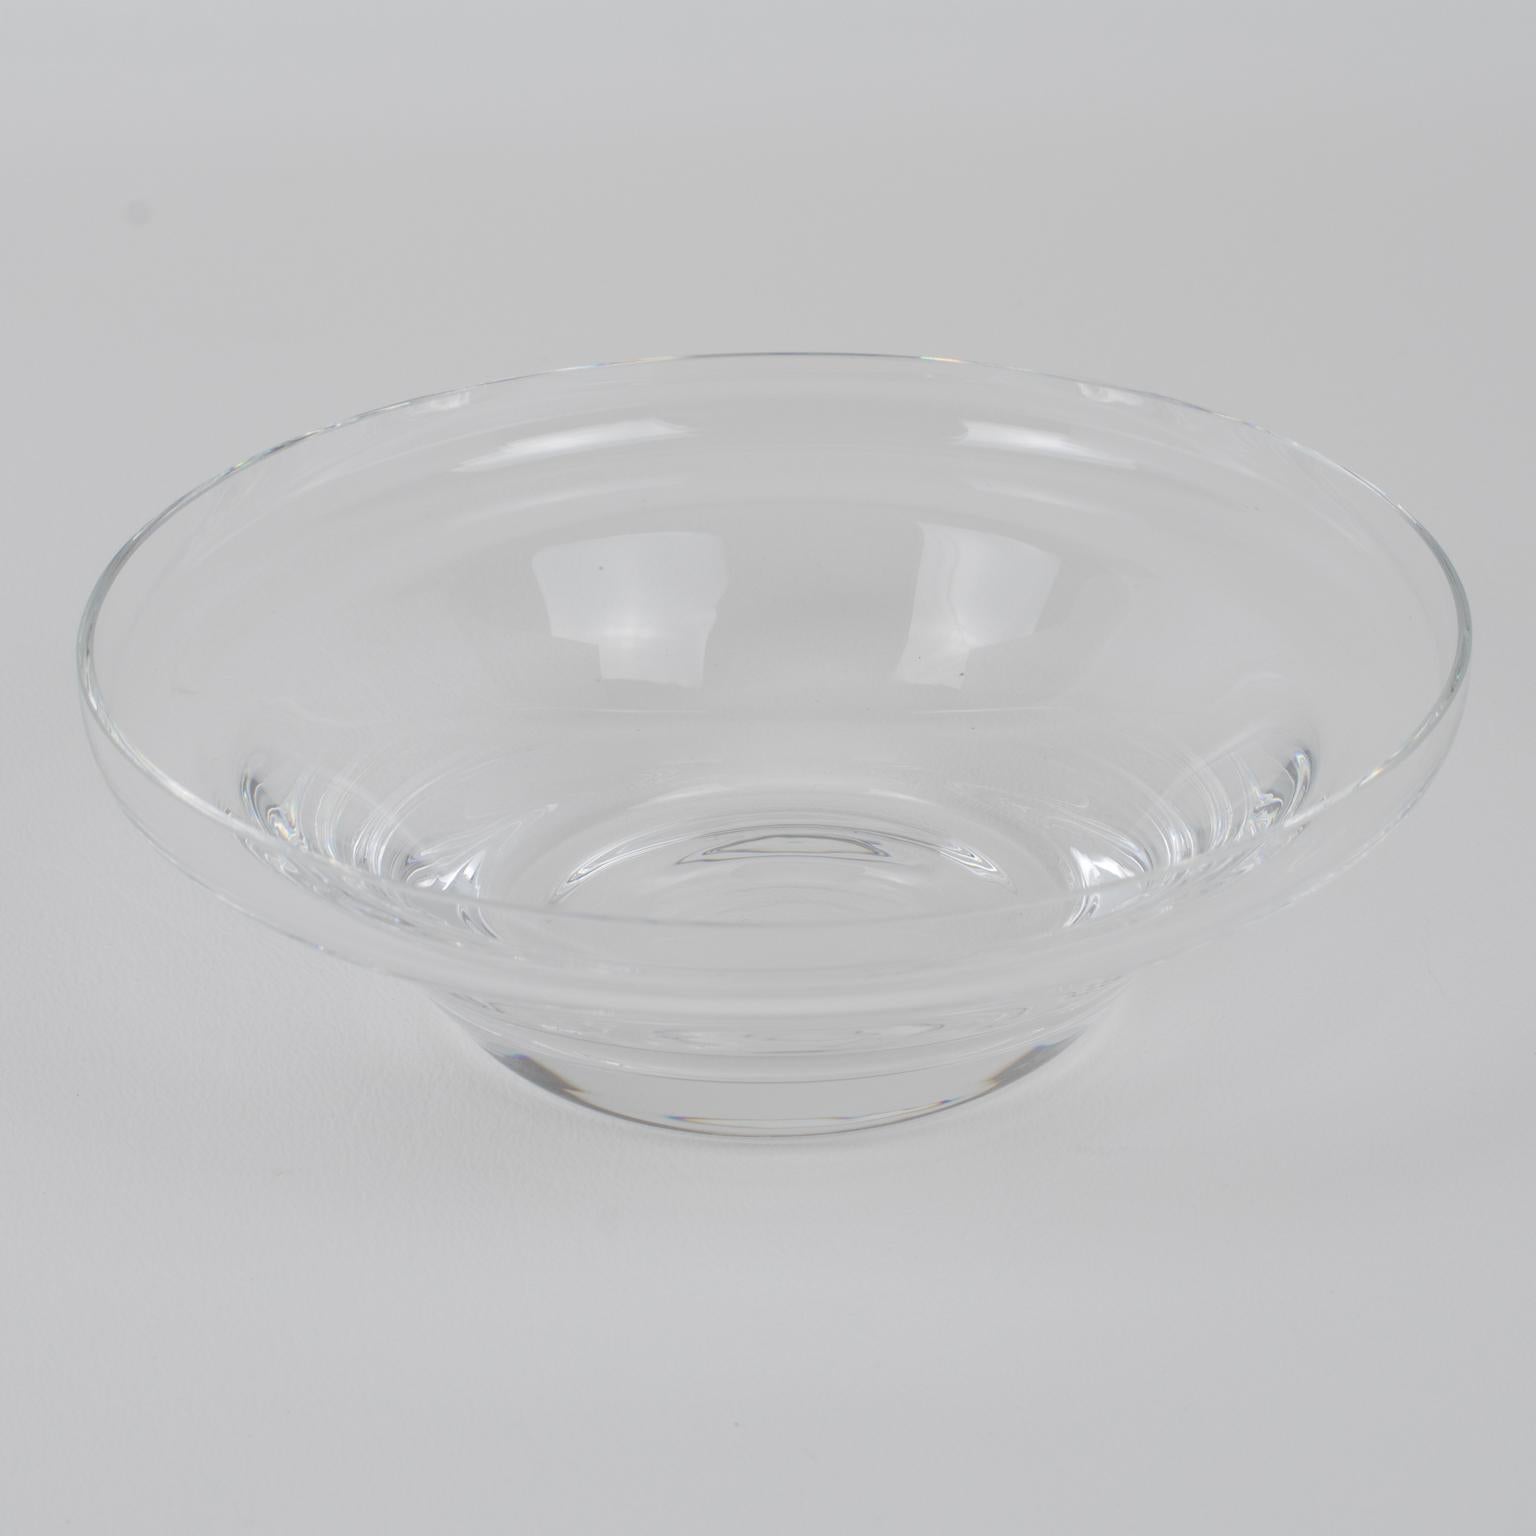 Silver Plate and Crystal Caviar Bowl Dish Server by St Hilaire, Paris 6